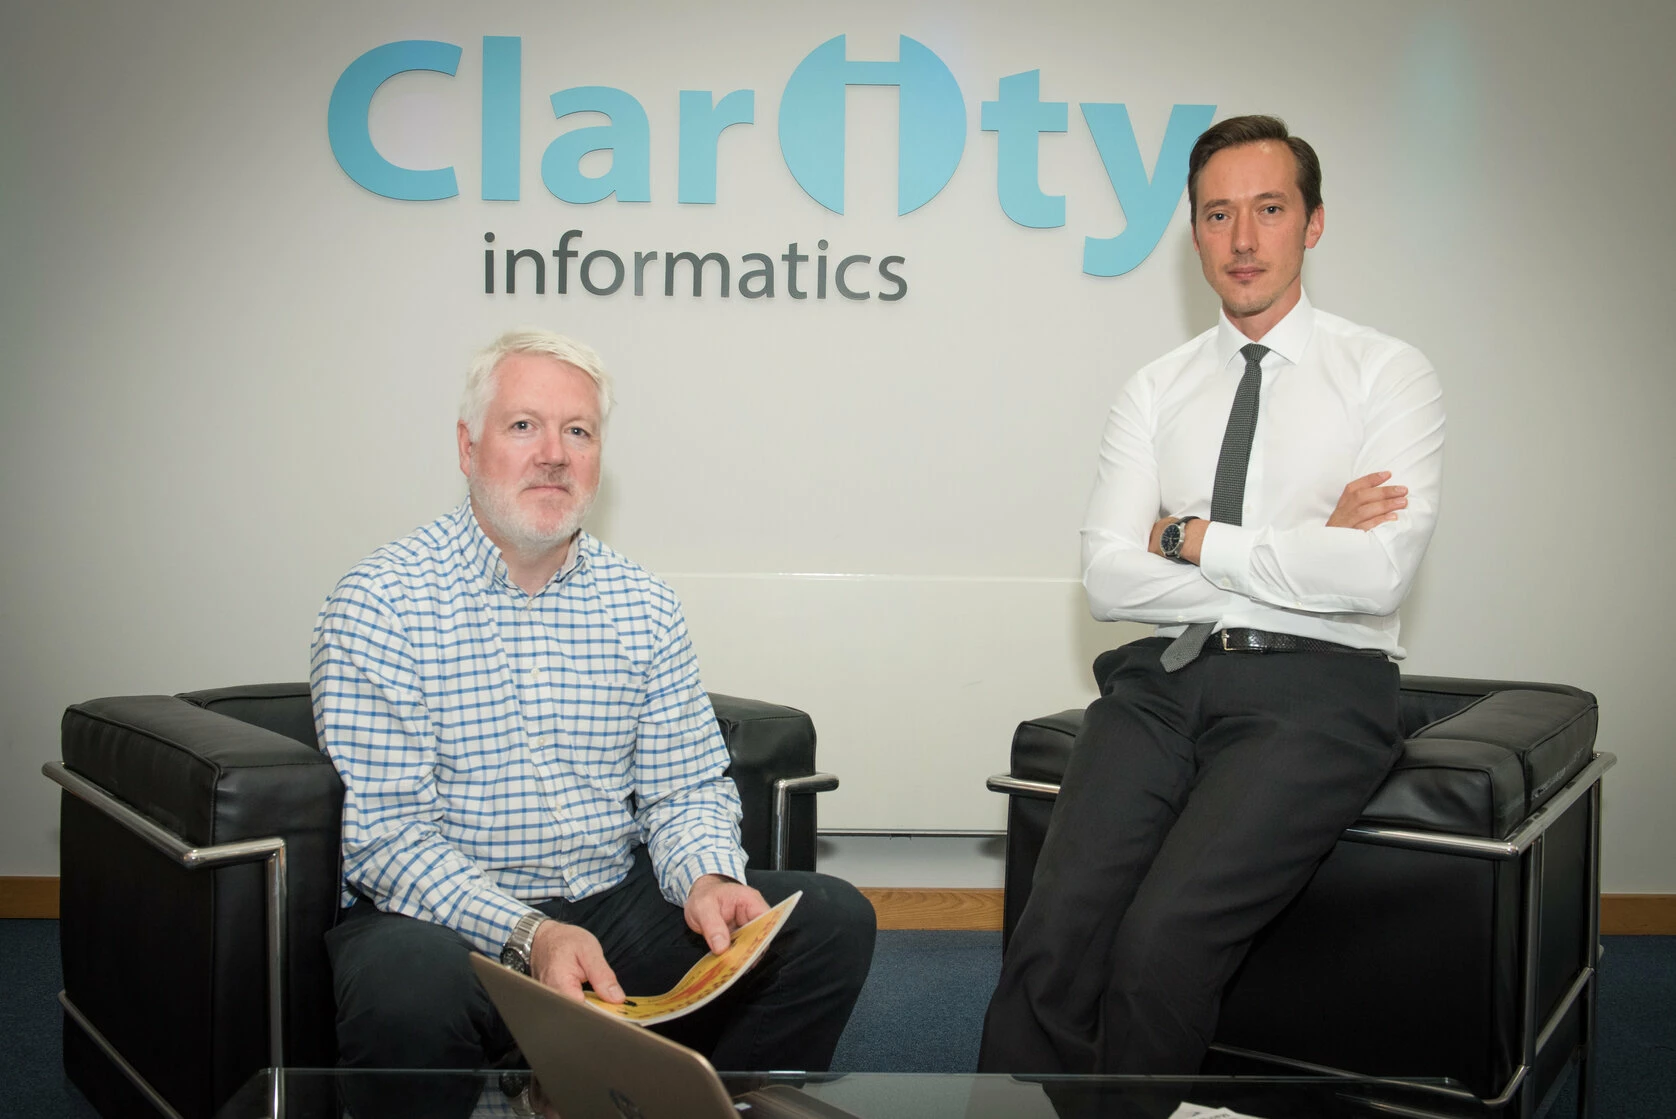 Medical Director & Editor of Clarity’s best-practice clinical guidance, Dr Gerry Morrow (L) with Clarity Informatics CEO, Tim Sewart (R)